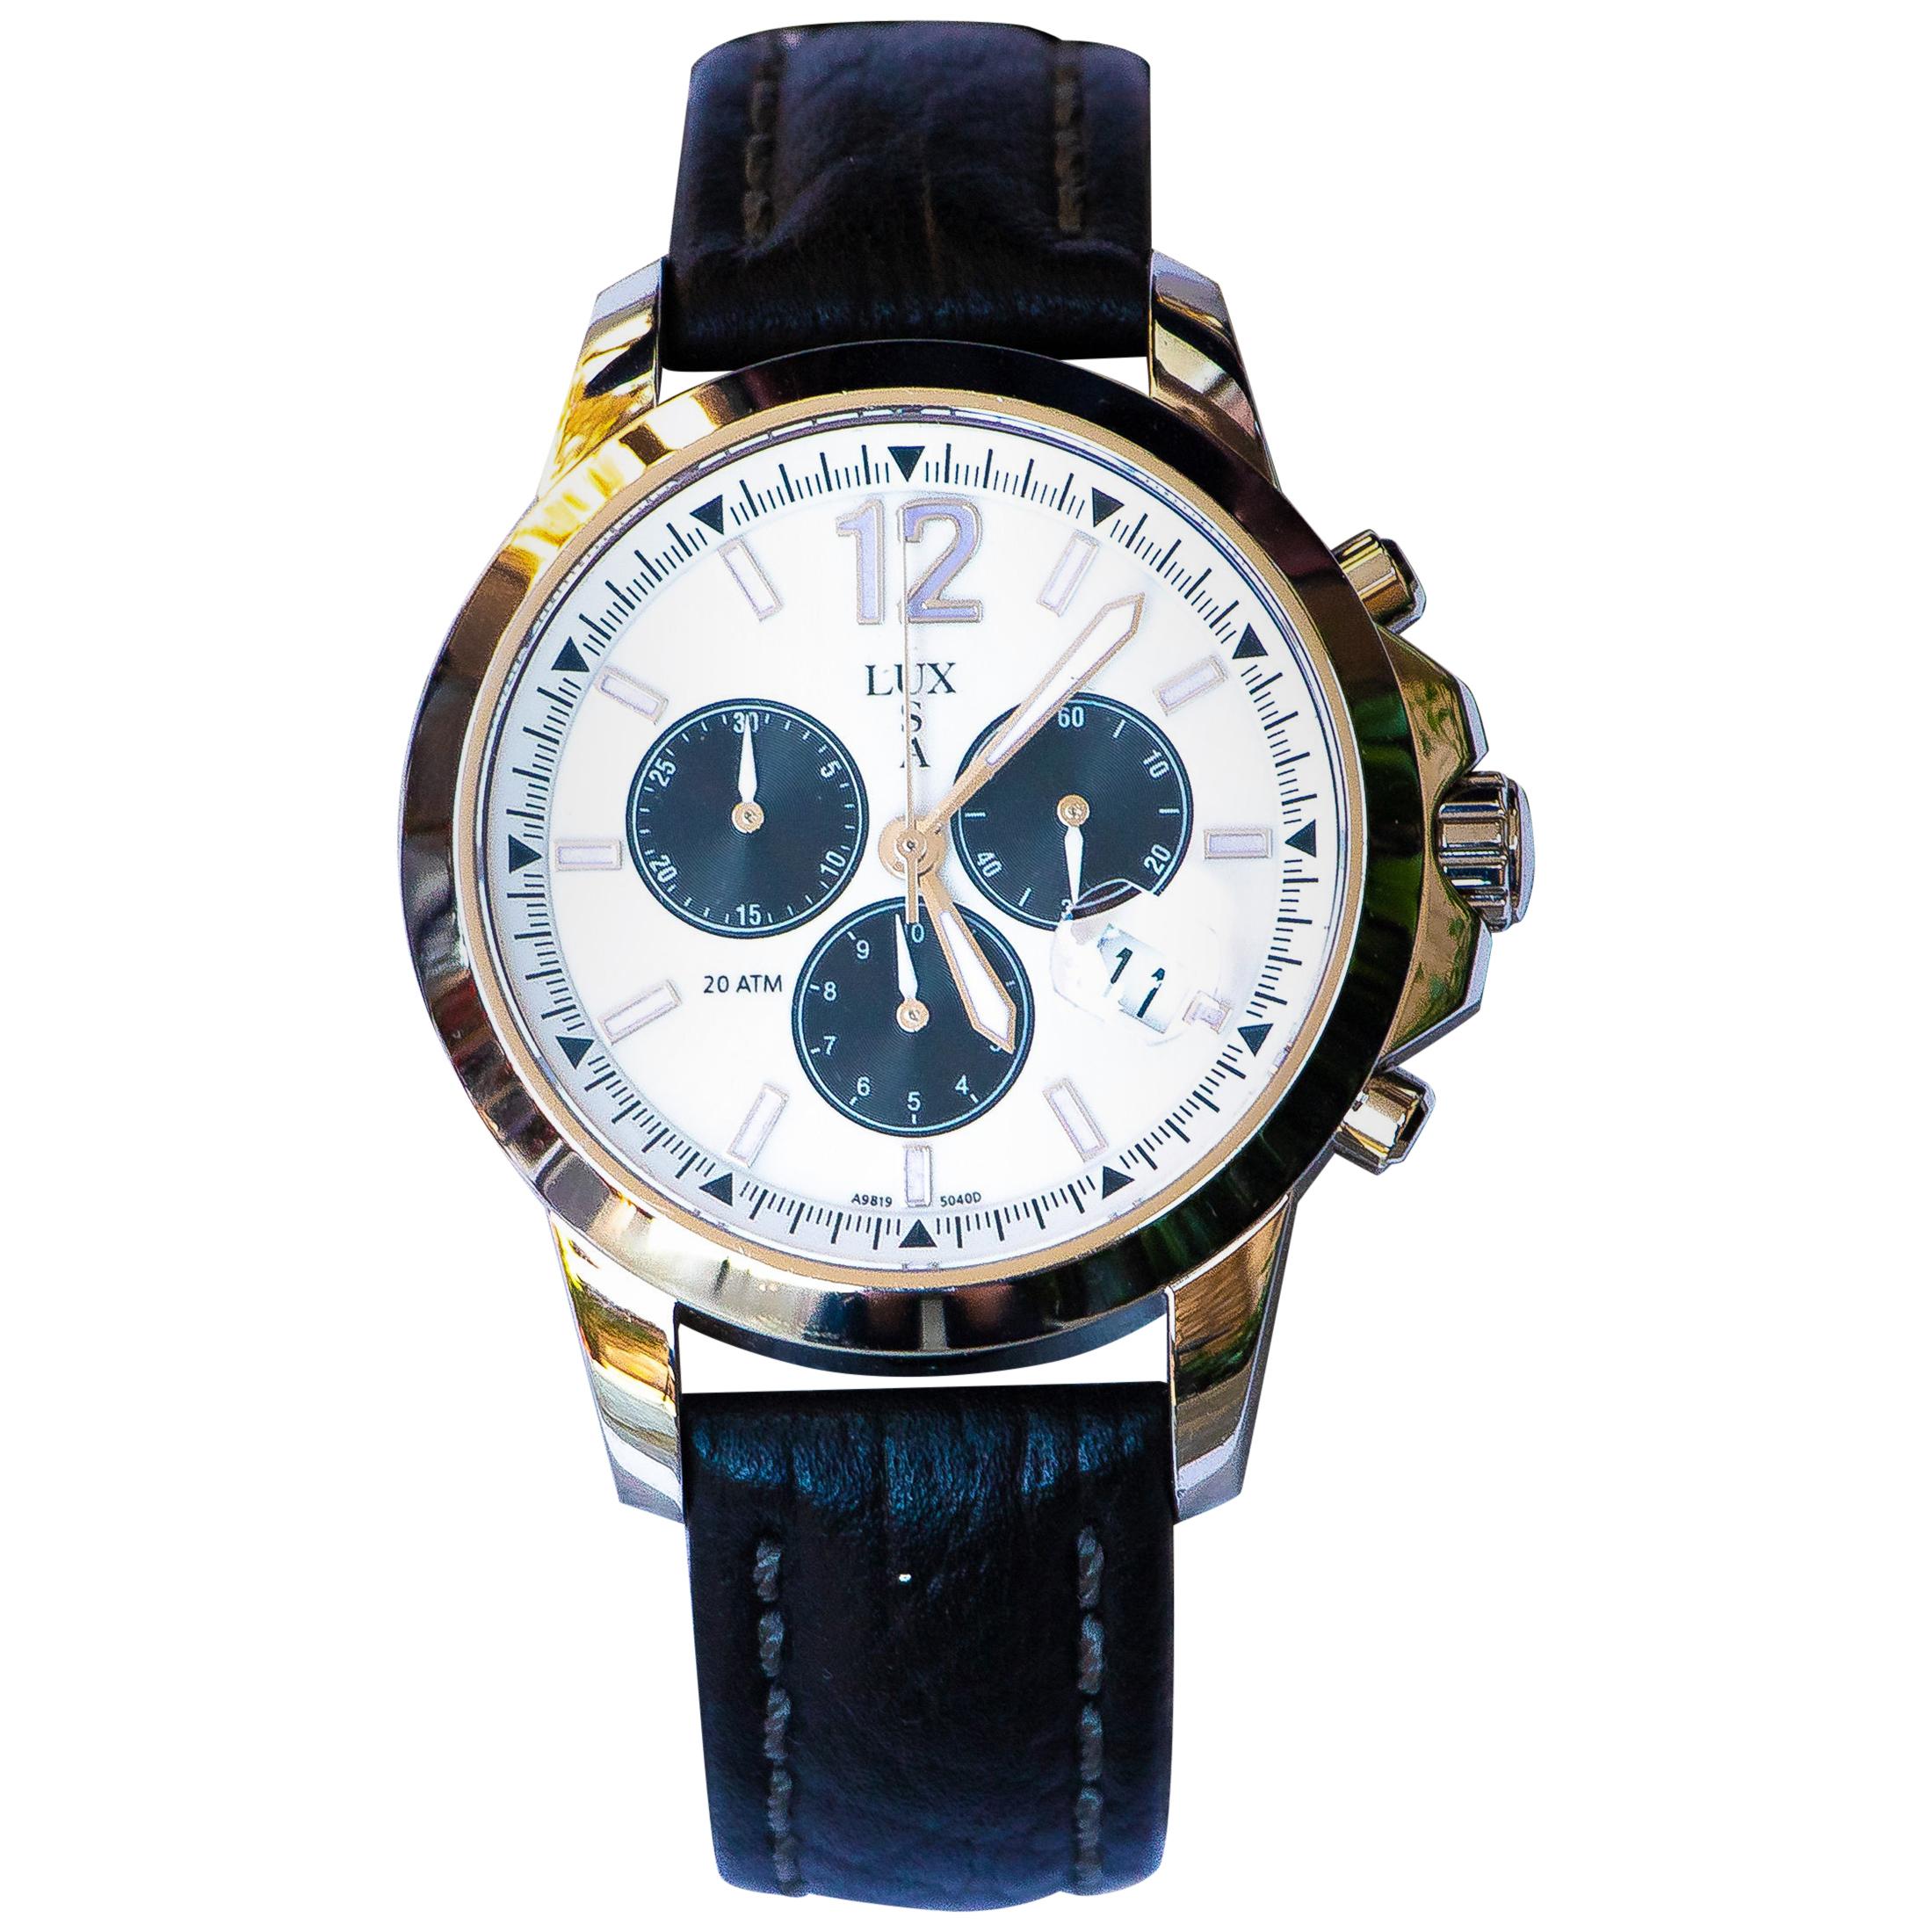 LUXUSA Stainless Steel Sapphire Crystal Chronograph Leather Strap Watch For Sale